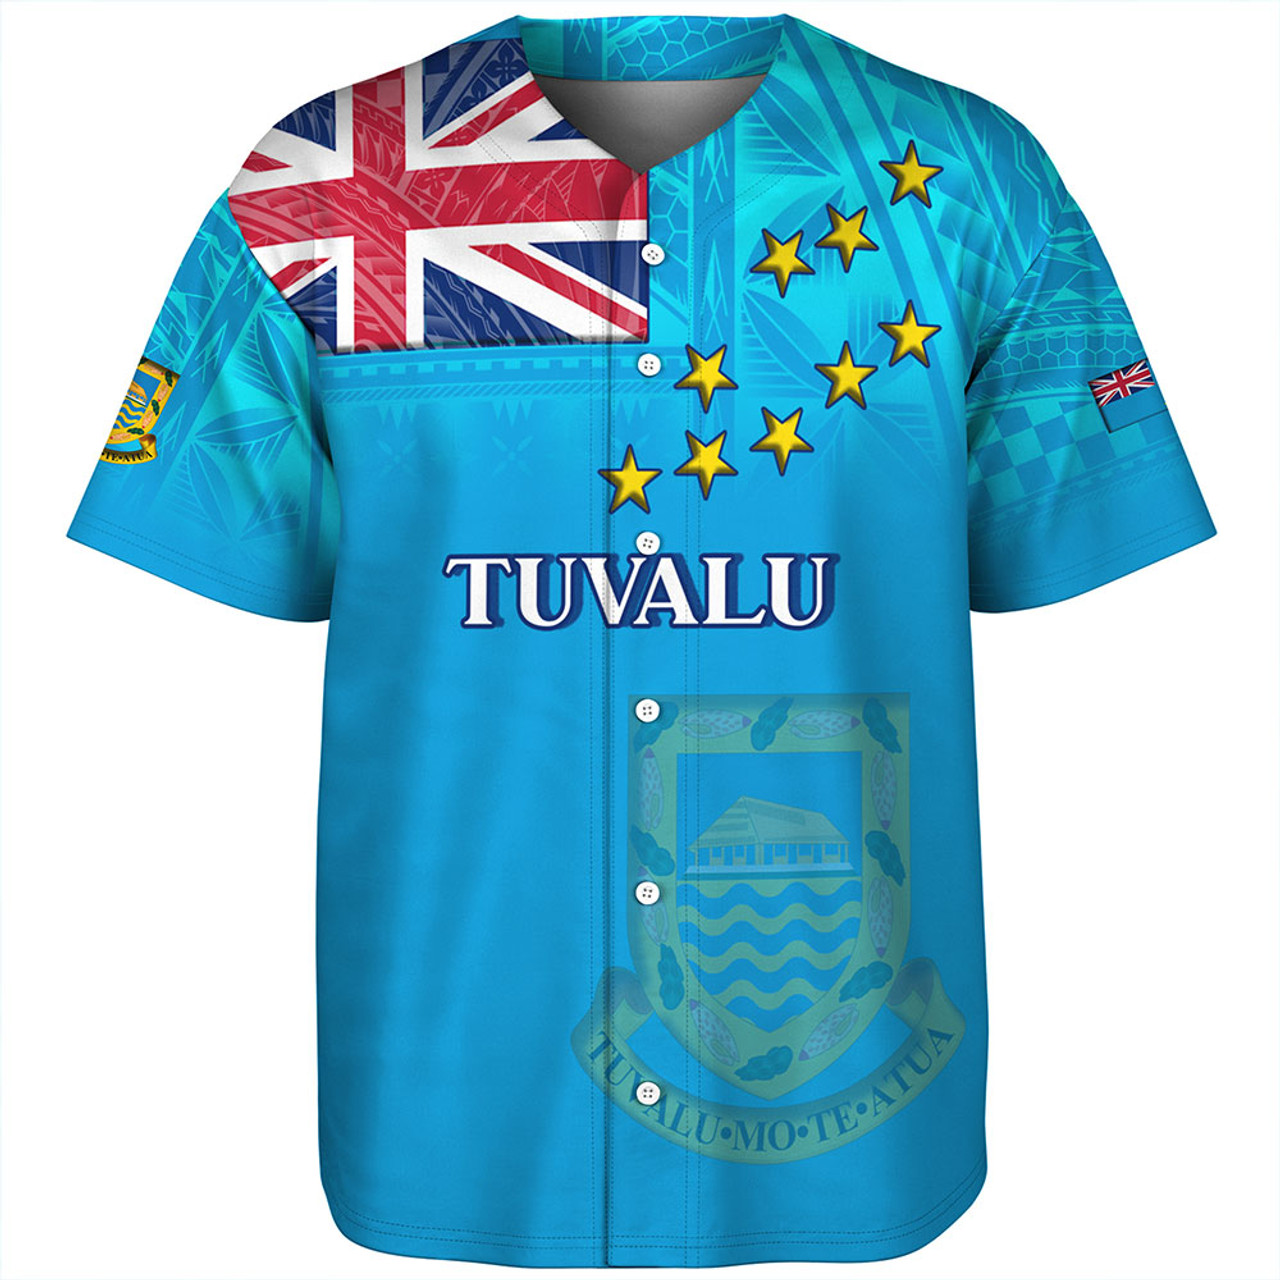 Tuvalu Baseball Shirt Flag Color With Traditional Patterns